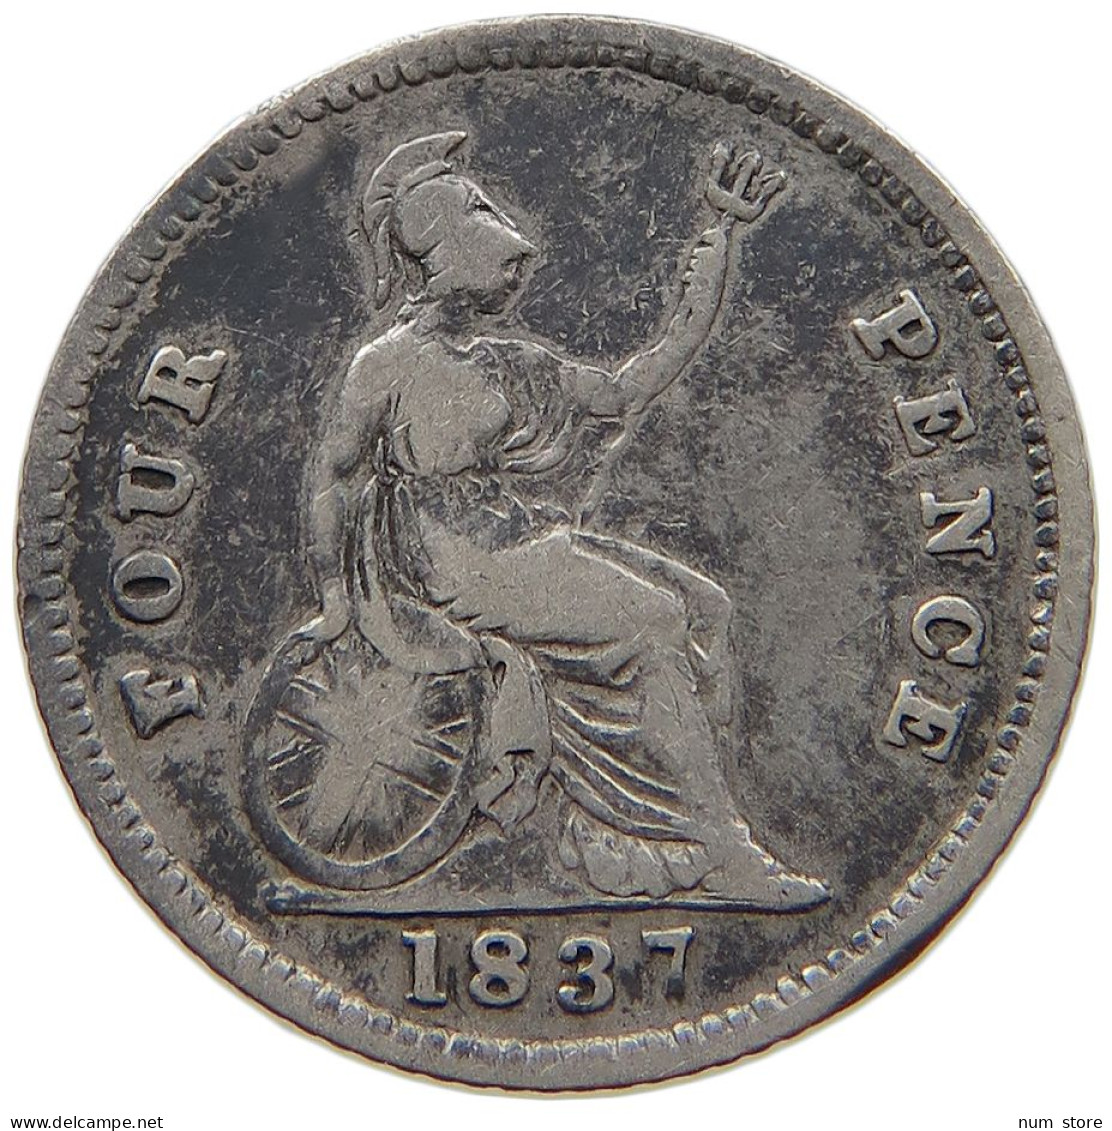 GREAT BRITAIN FOURPENCE 1837 Victoria 1837-1901 #c058 0287 - G. 4 Pence/ Groat